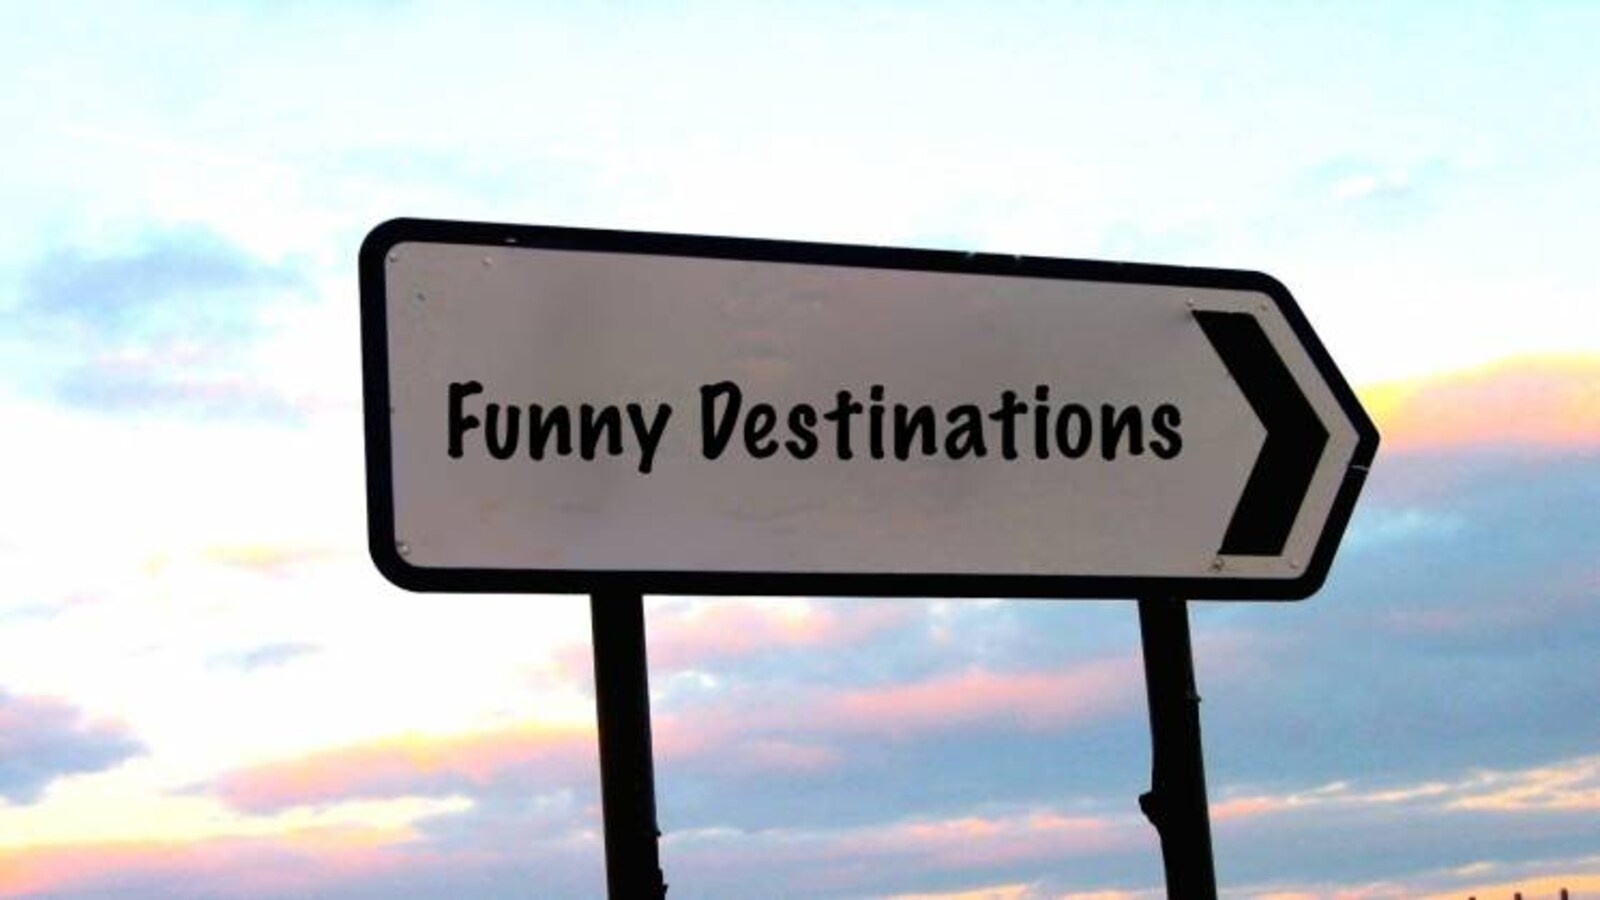 Travel: Here are some strange place names from around the world